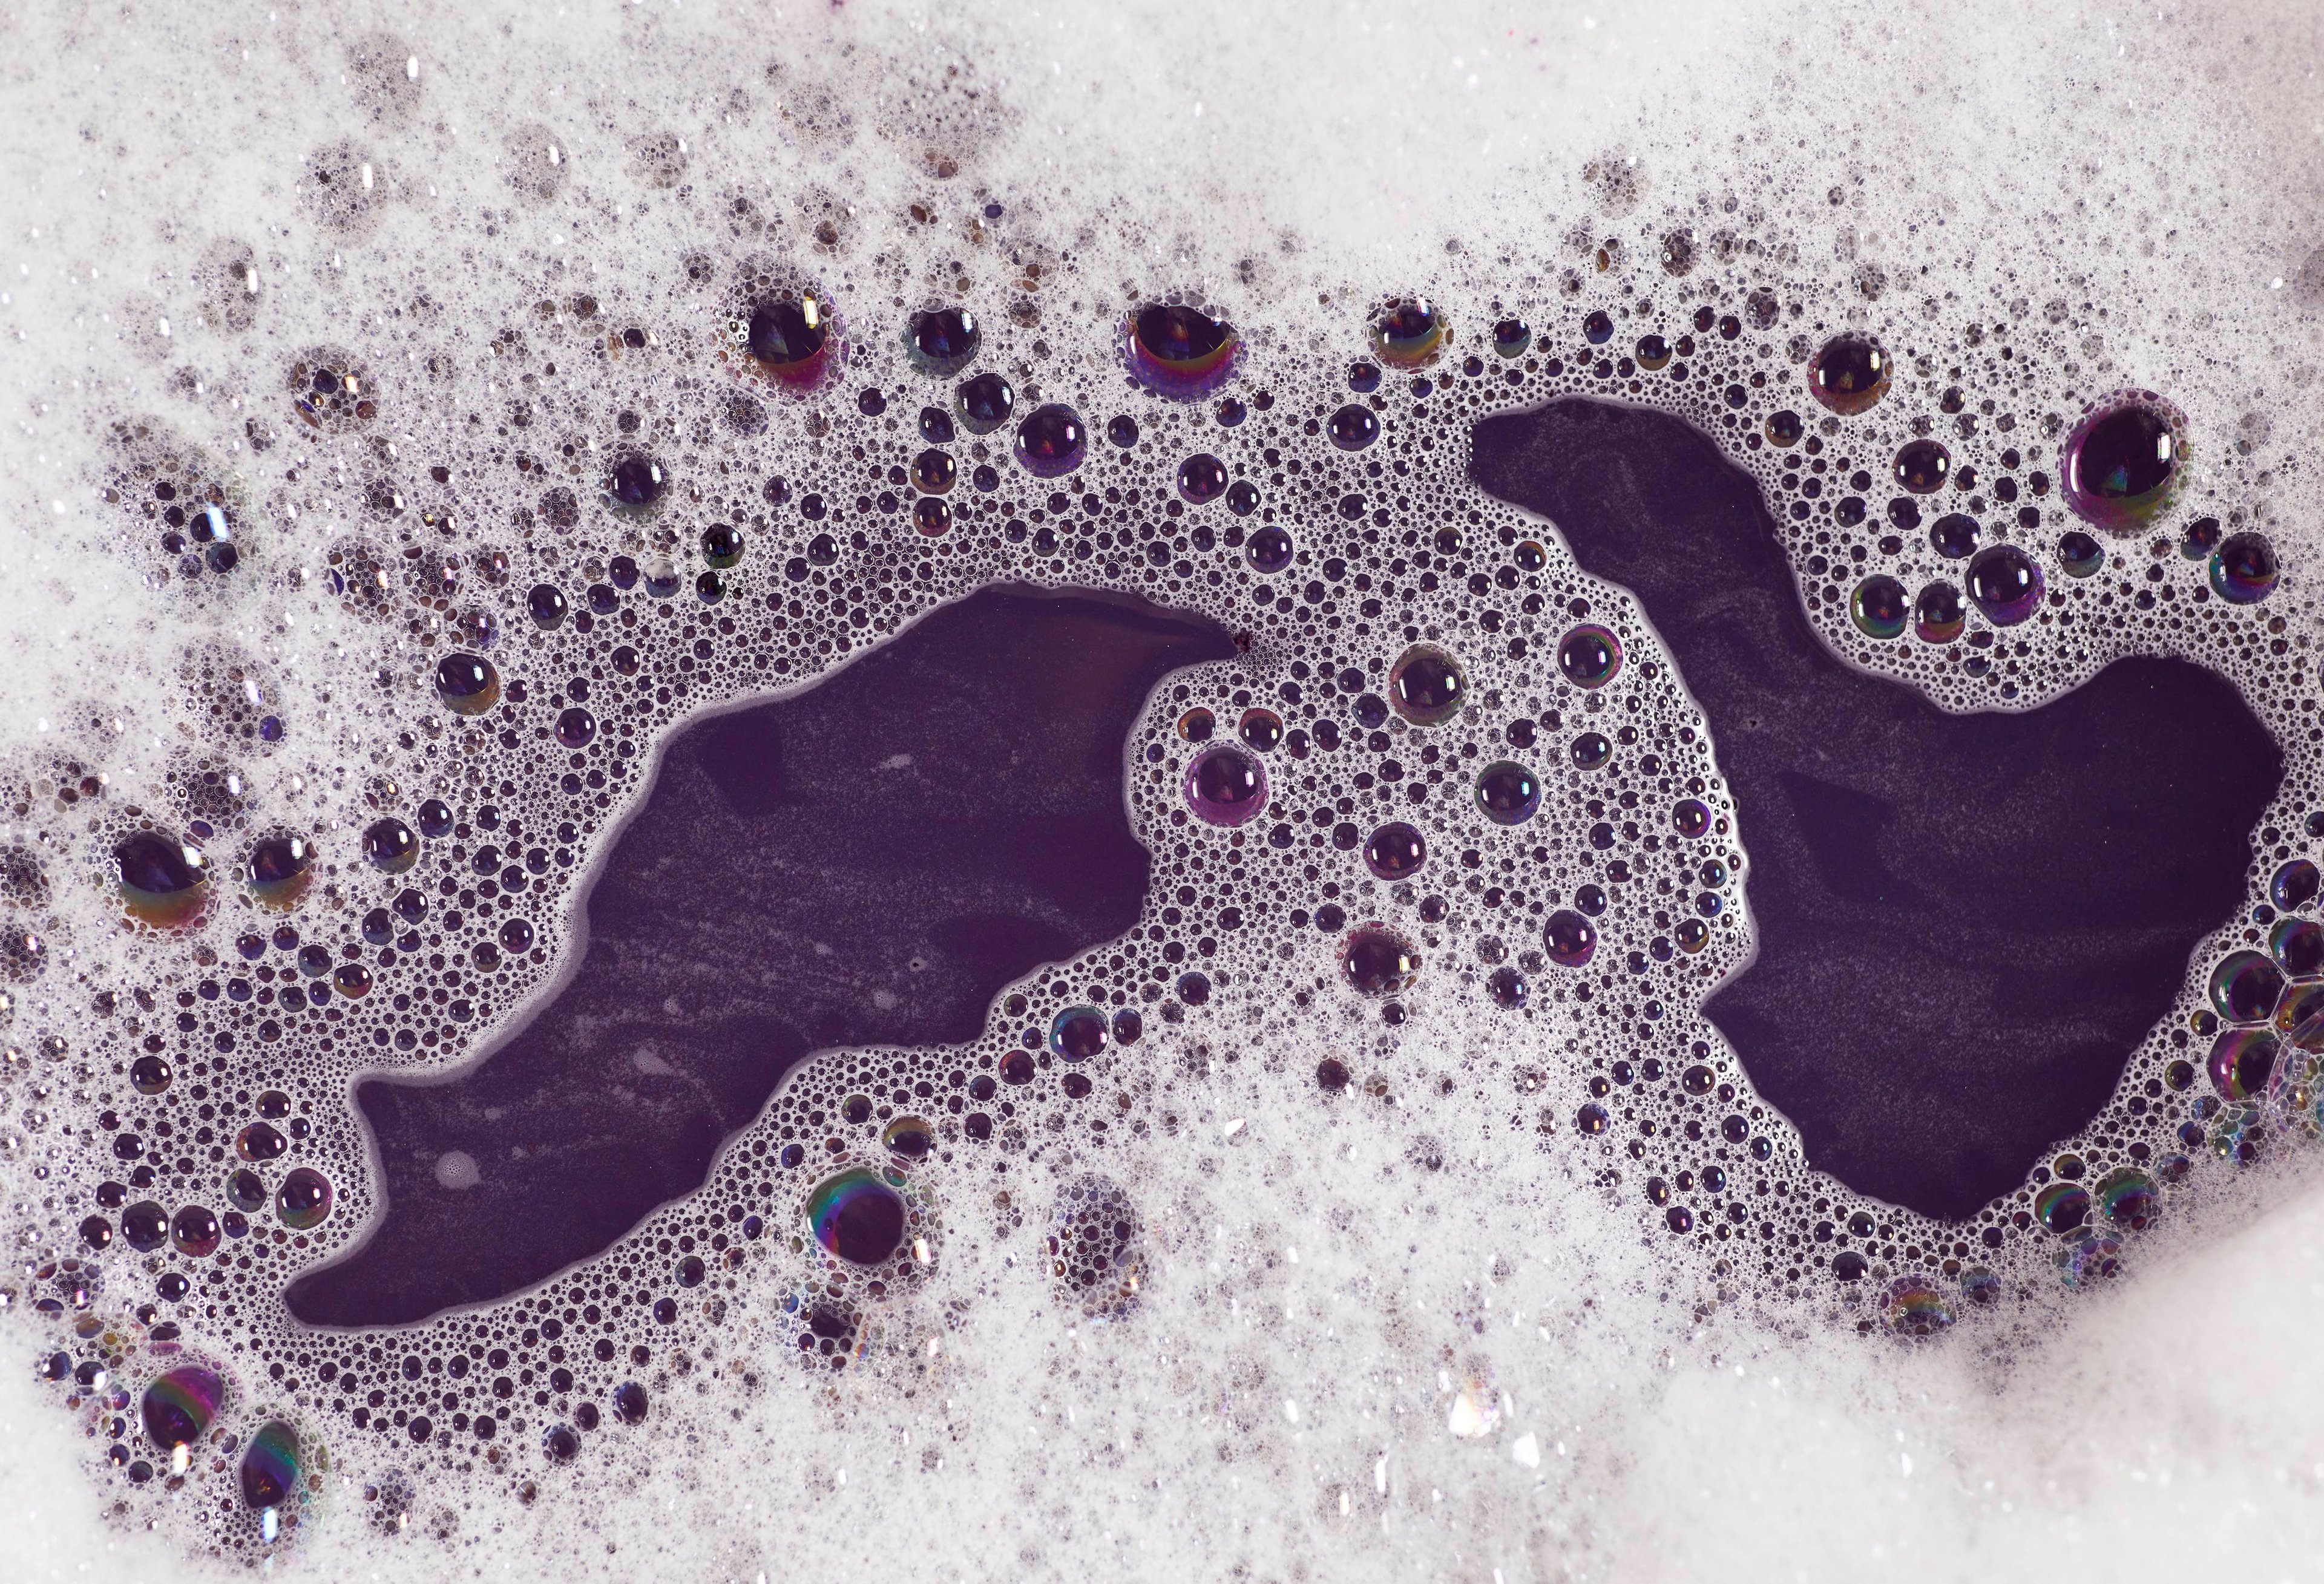 The image shows a close-up of deep, gothic, purple-coloured water surrounded by light, fluffy bubbles.